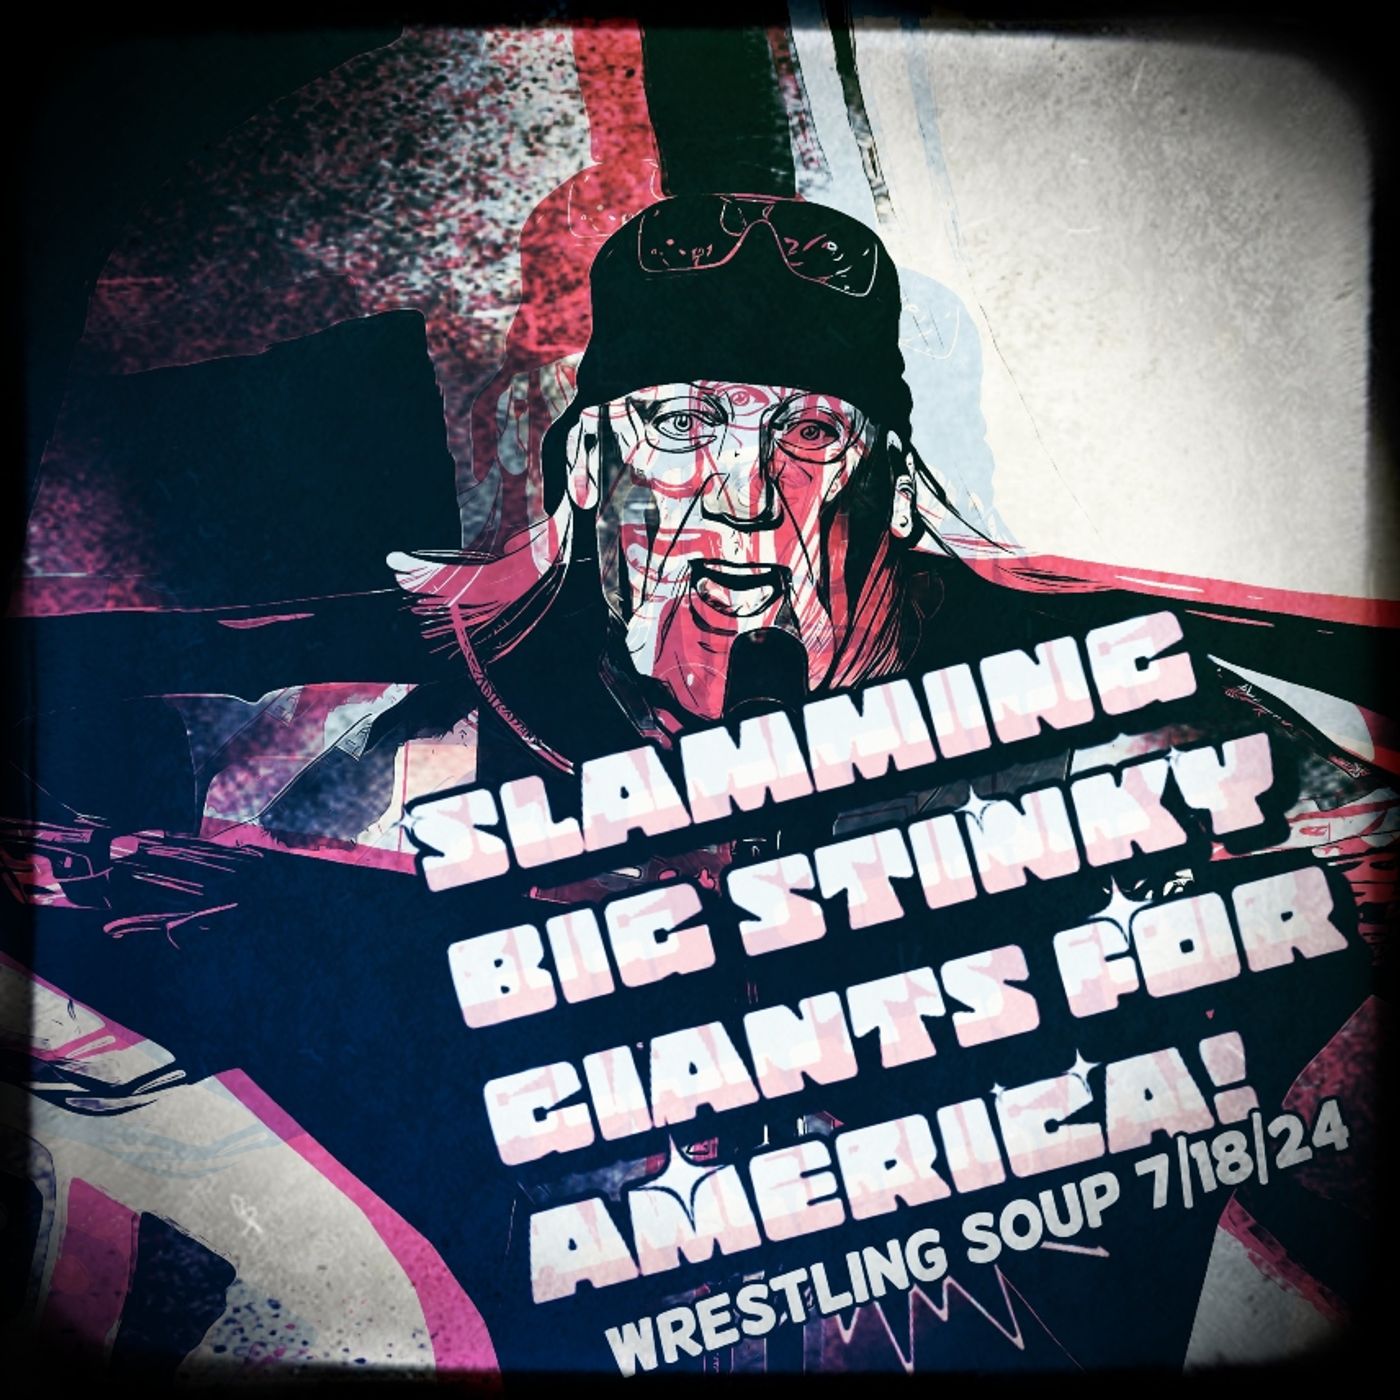 SLAMMING STINKY GIANTS or THE OSPREY OBSESSIONS (Wrestling Soup 7/18/24)